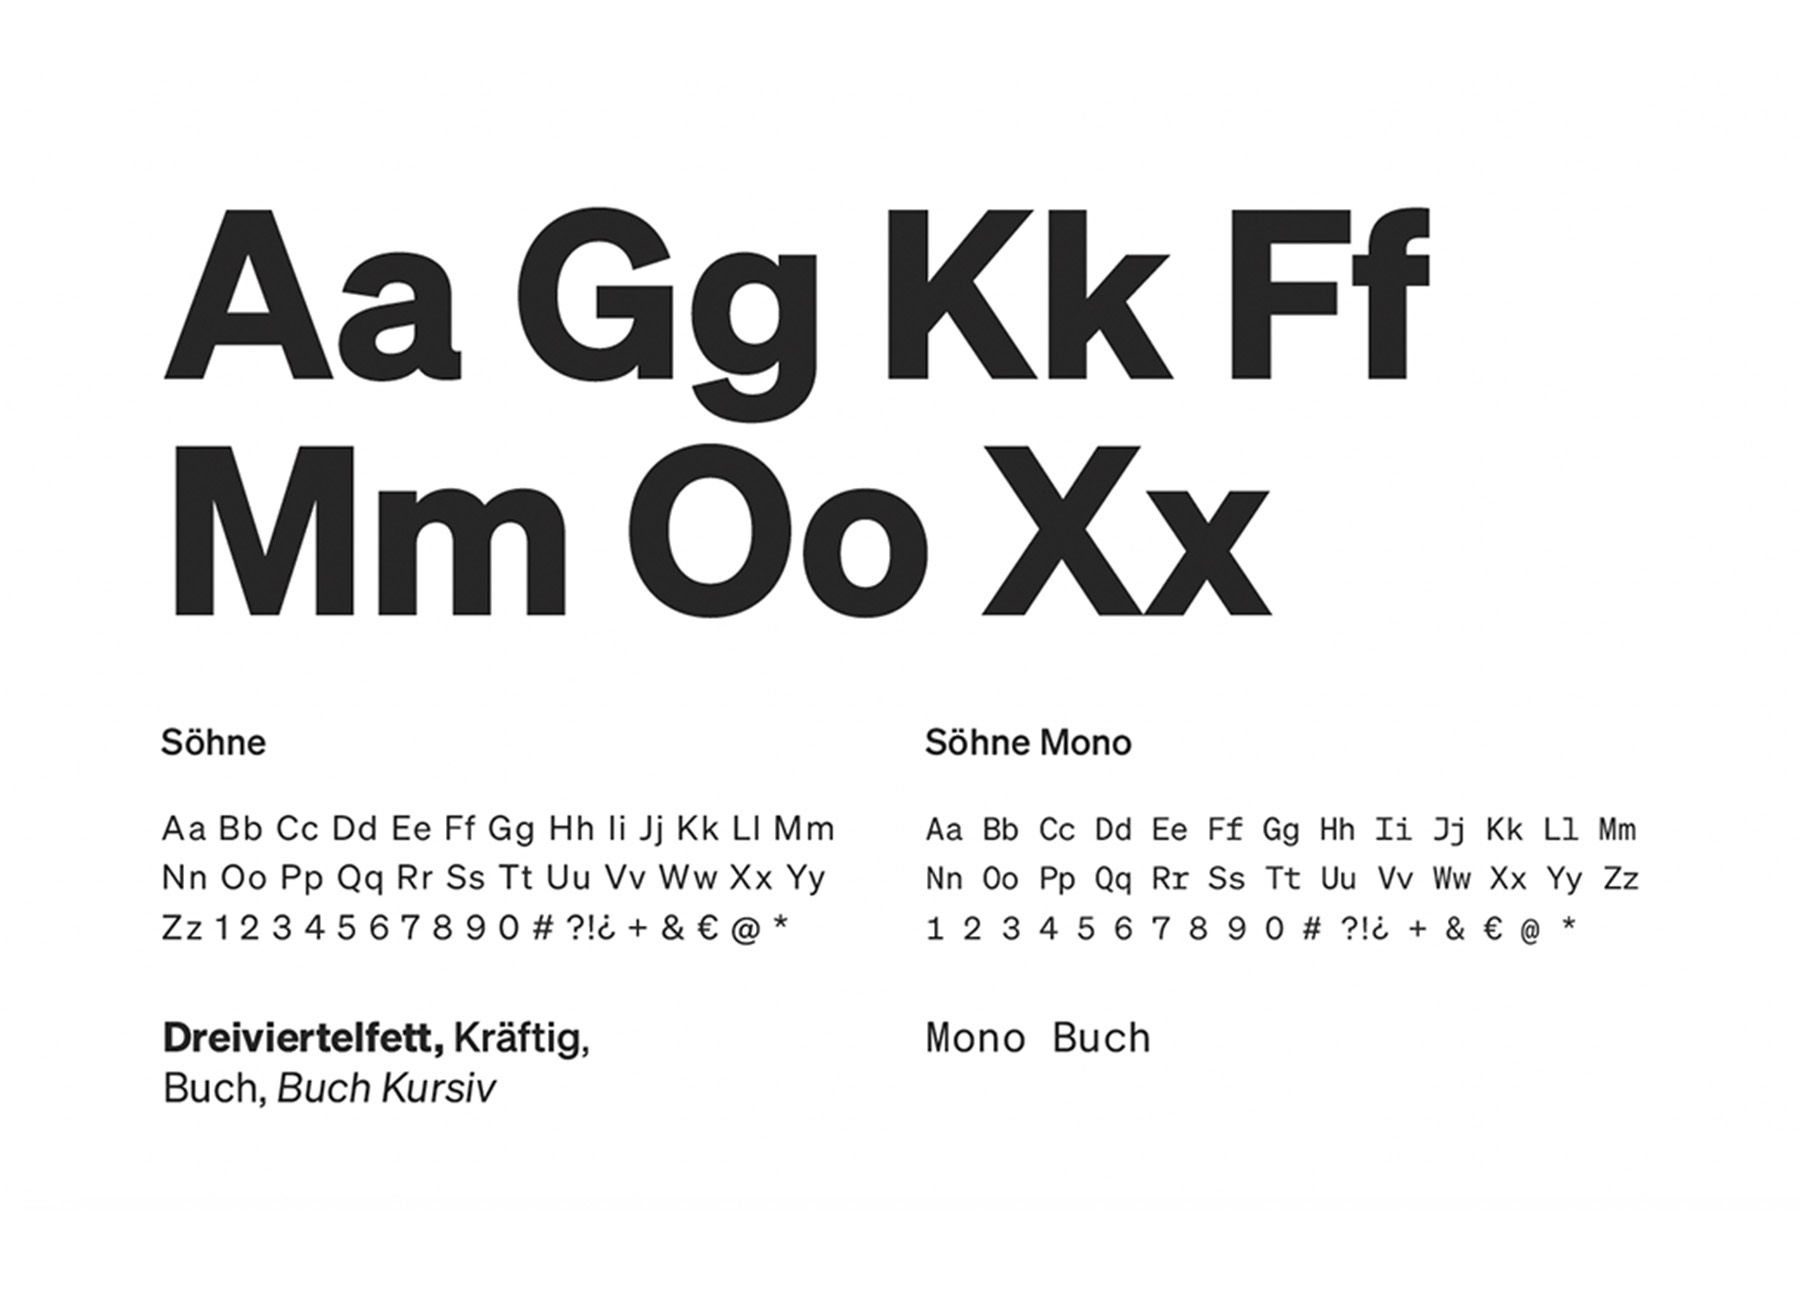 An example of the typeface 